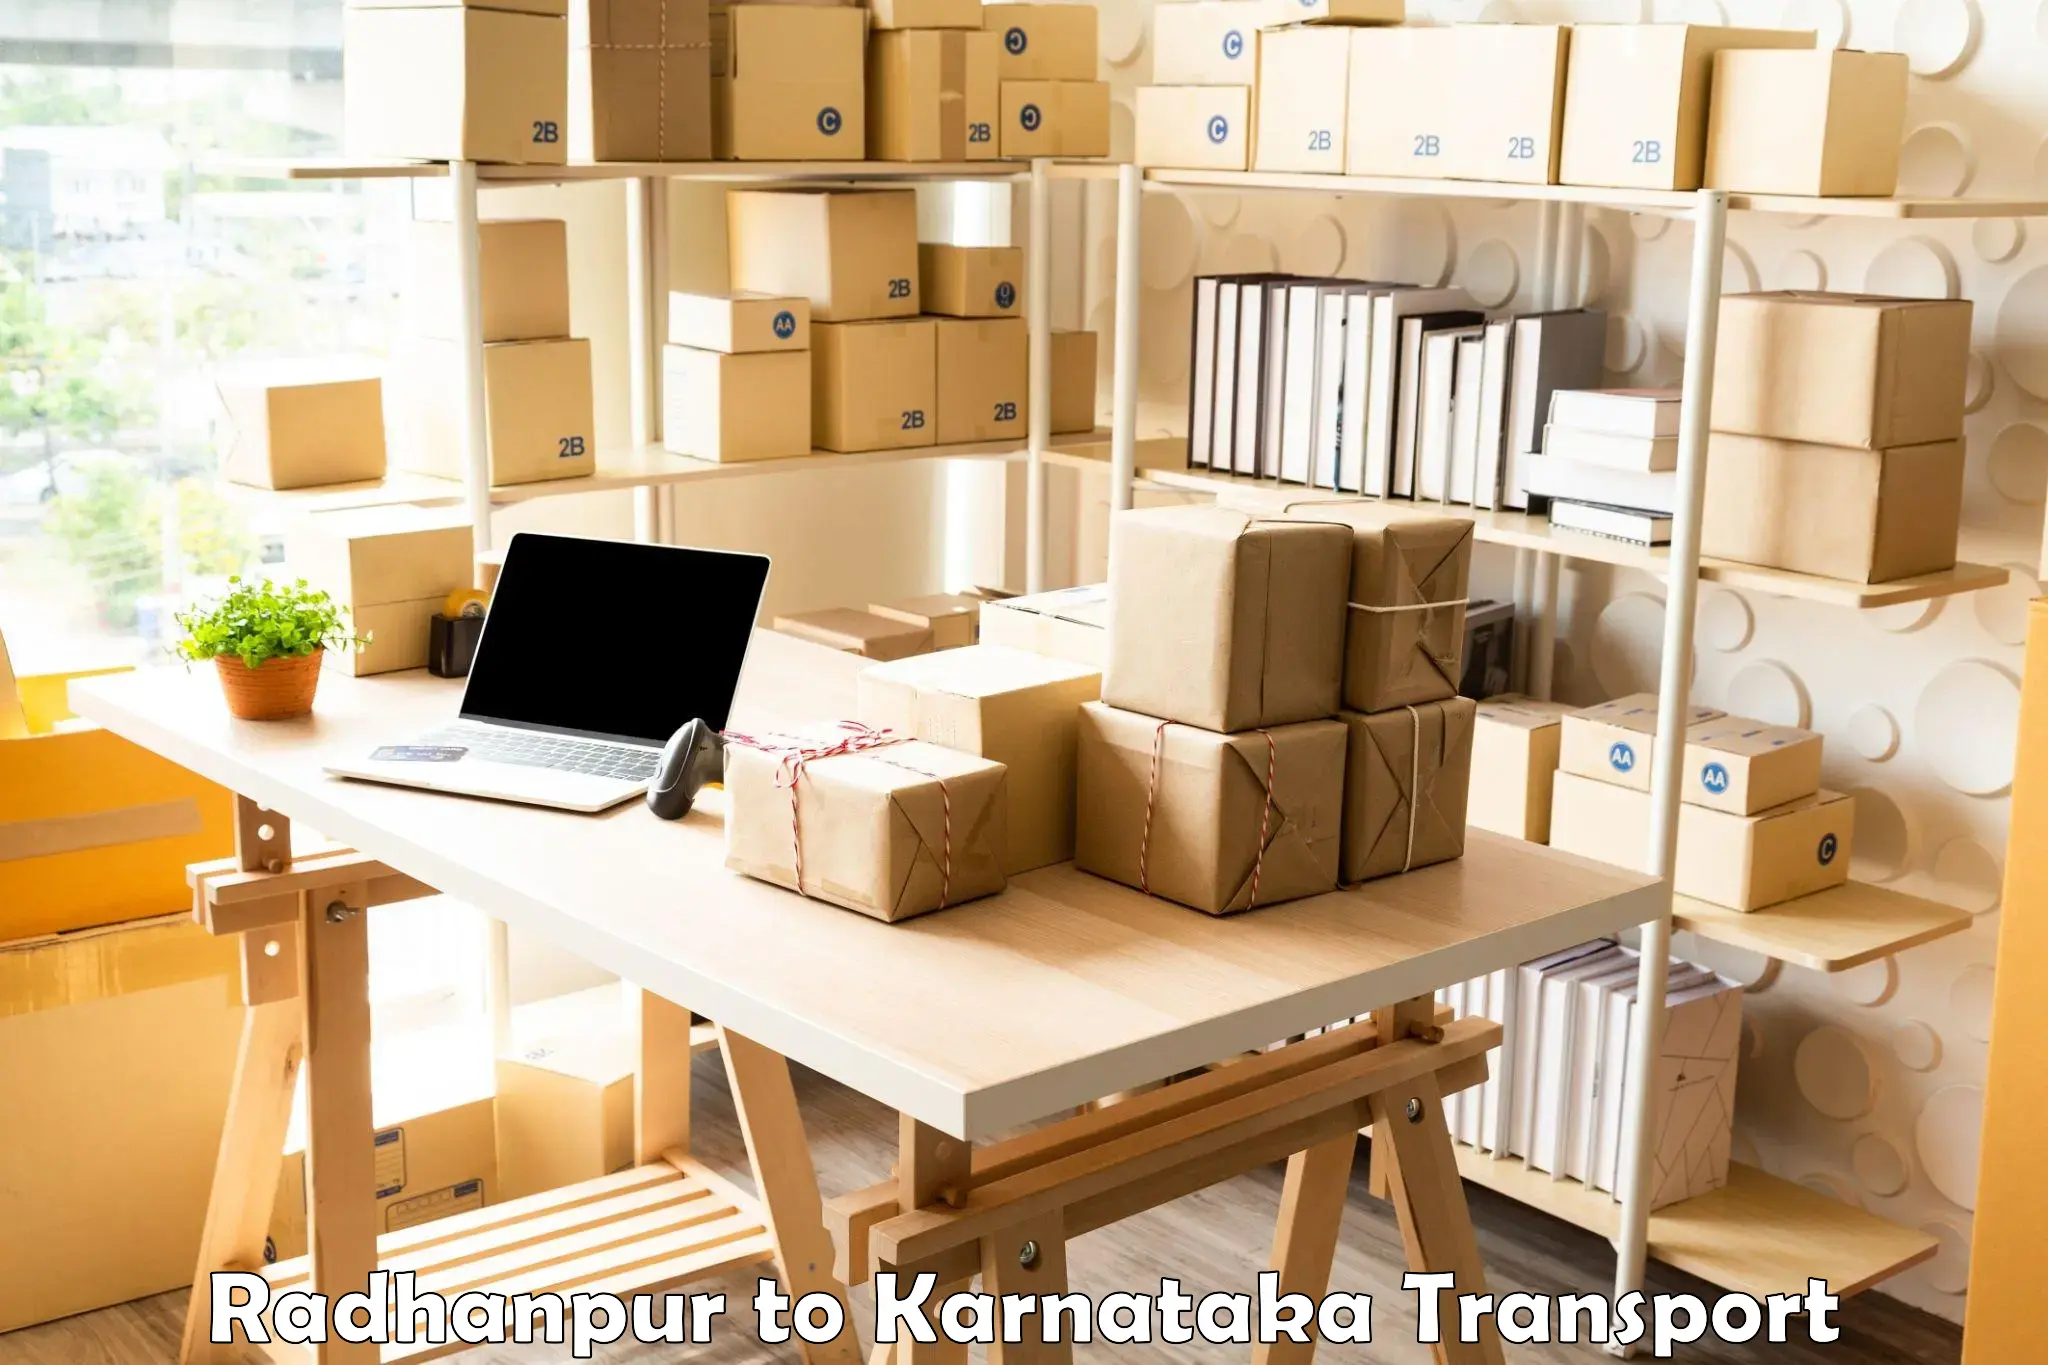 Transportation solution services Radhanpur to Manipal Academy of Higher Education